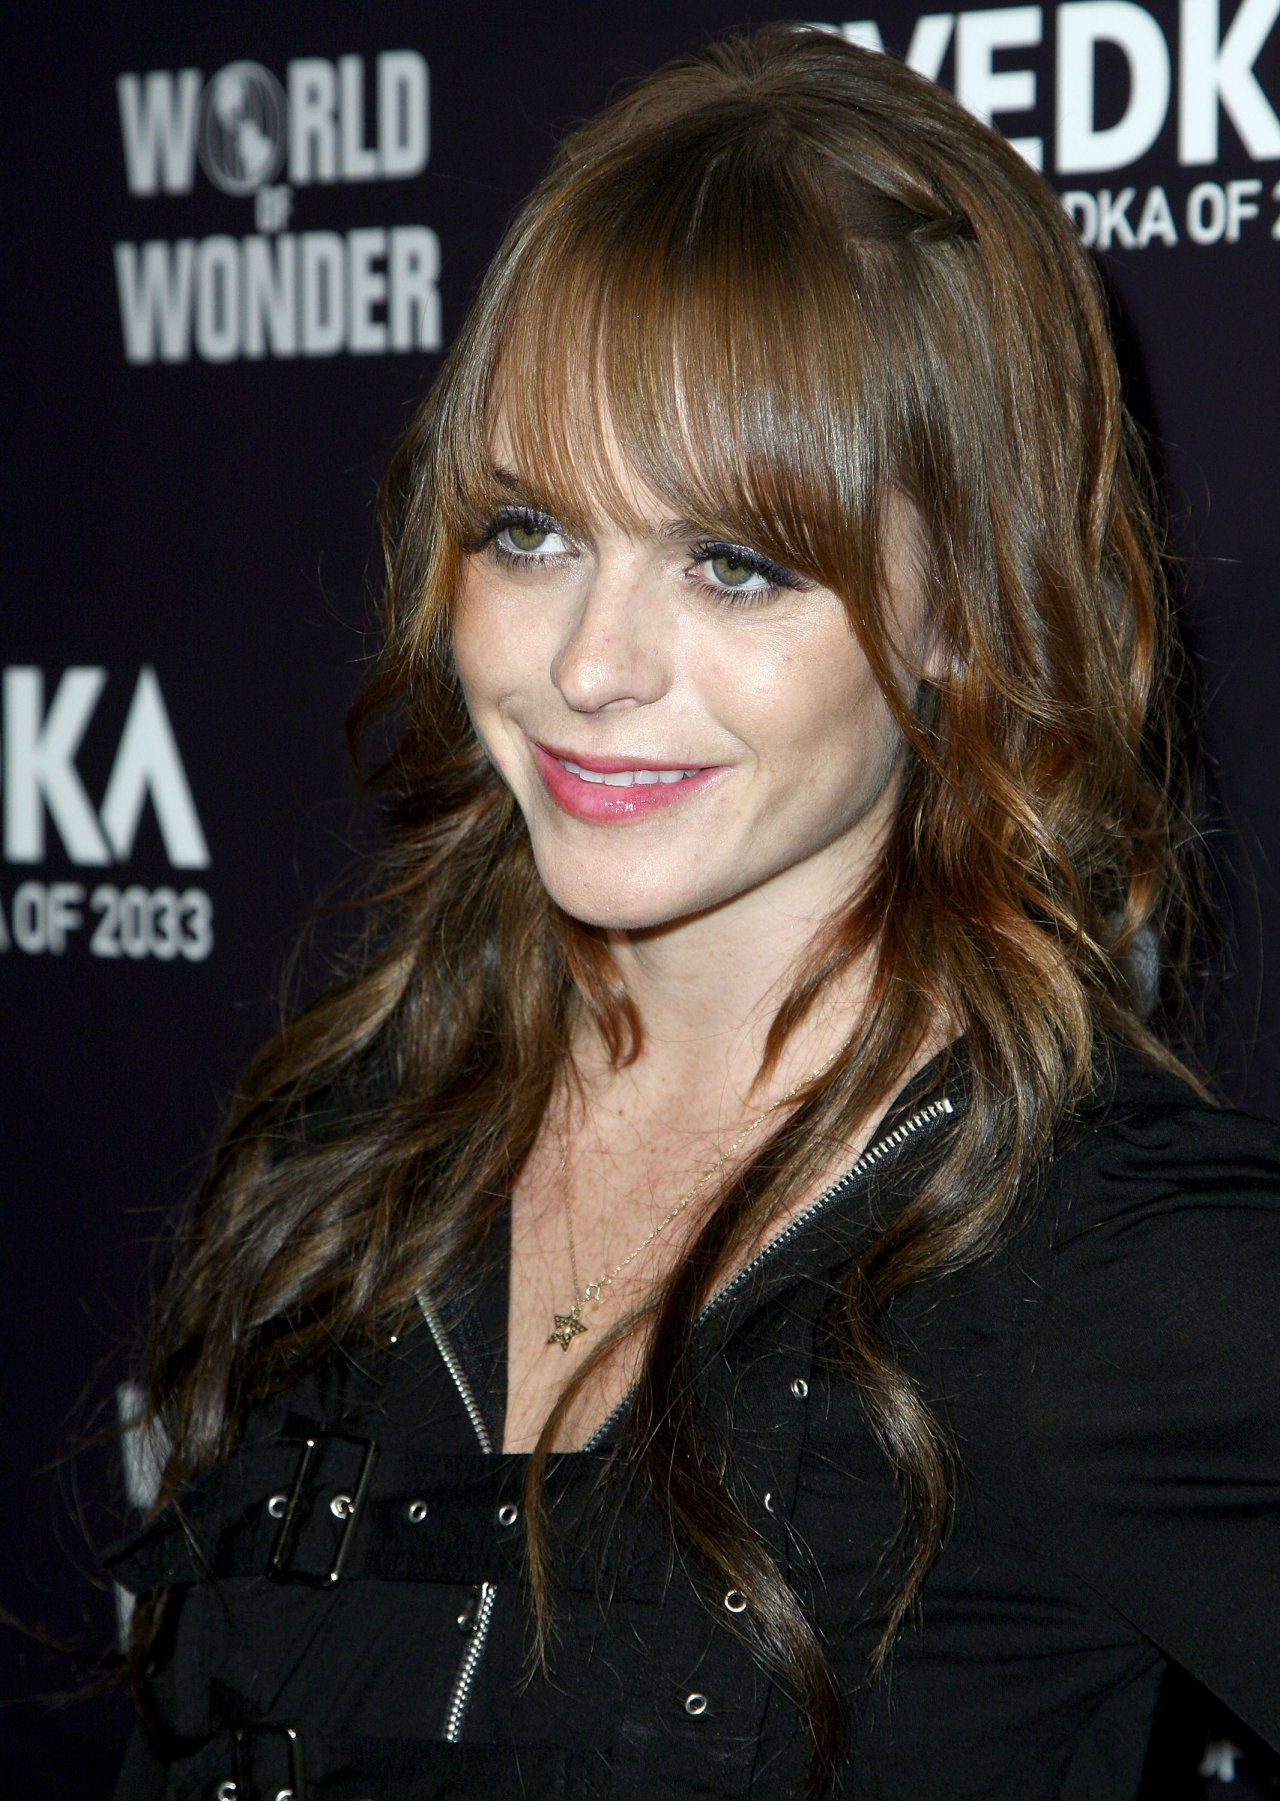 Taryn Manning leaked wallpapers